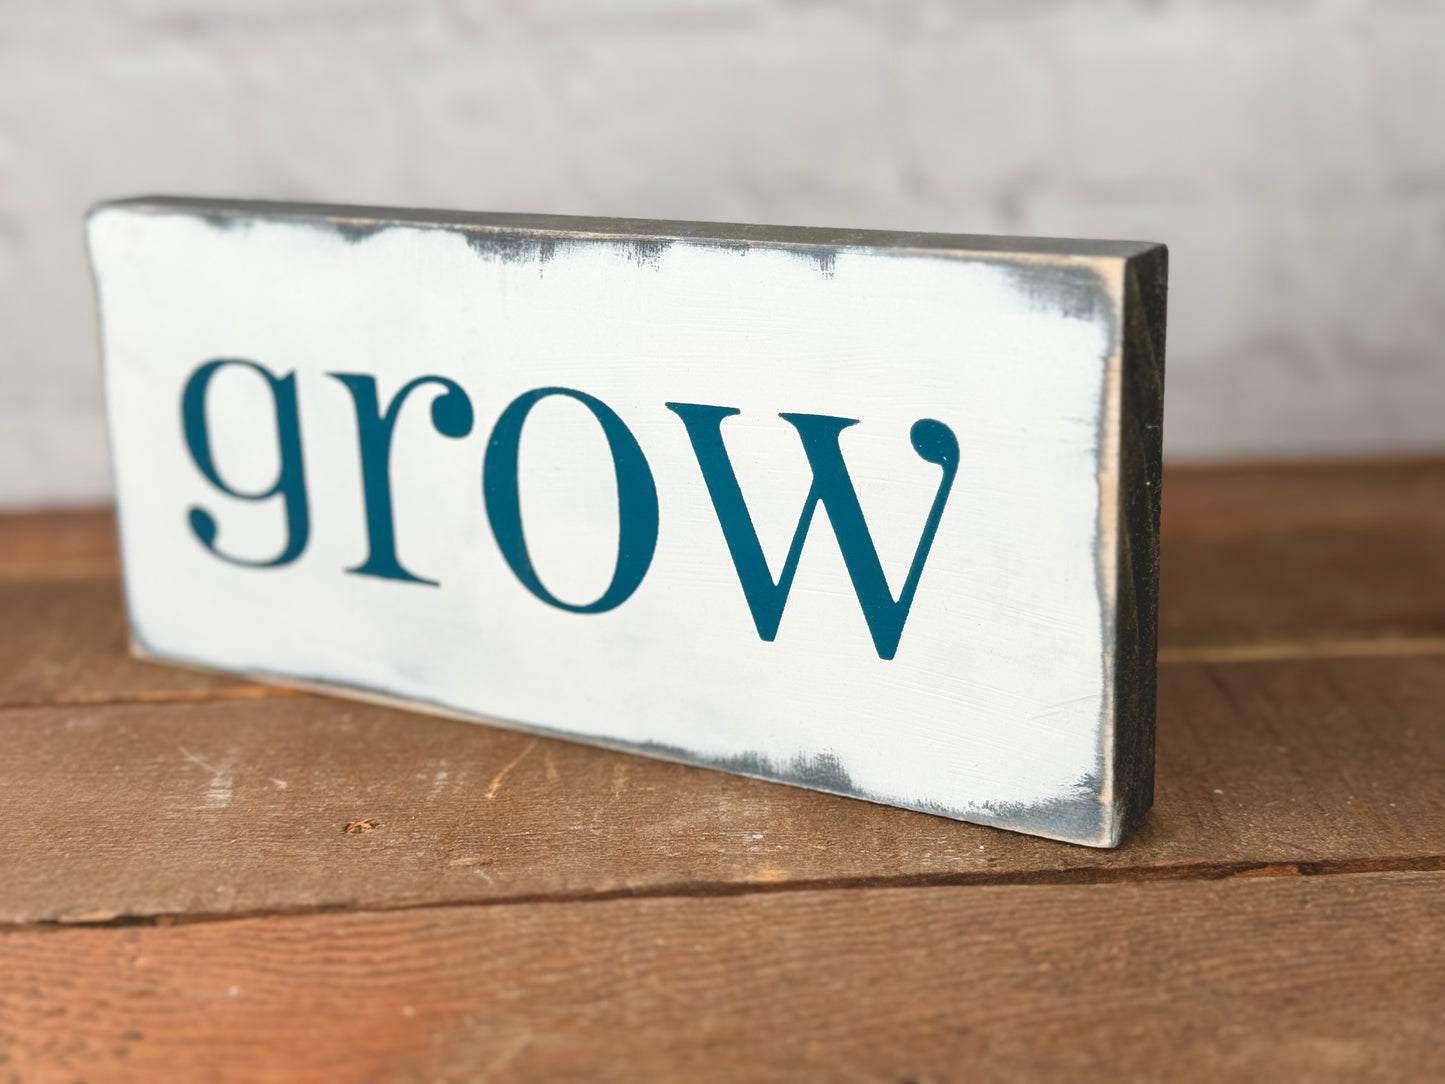 INSPIRATIONAL WORD SIGNS- WOOD SIGN